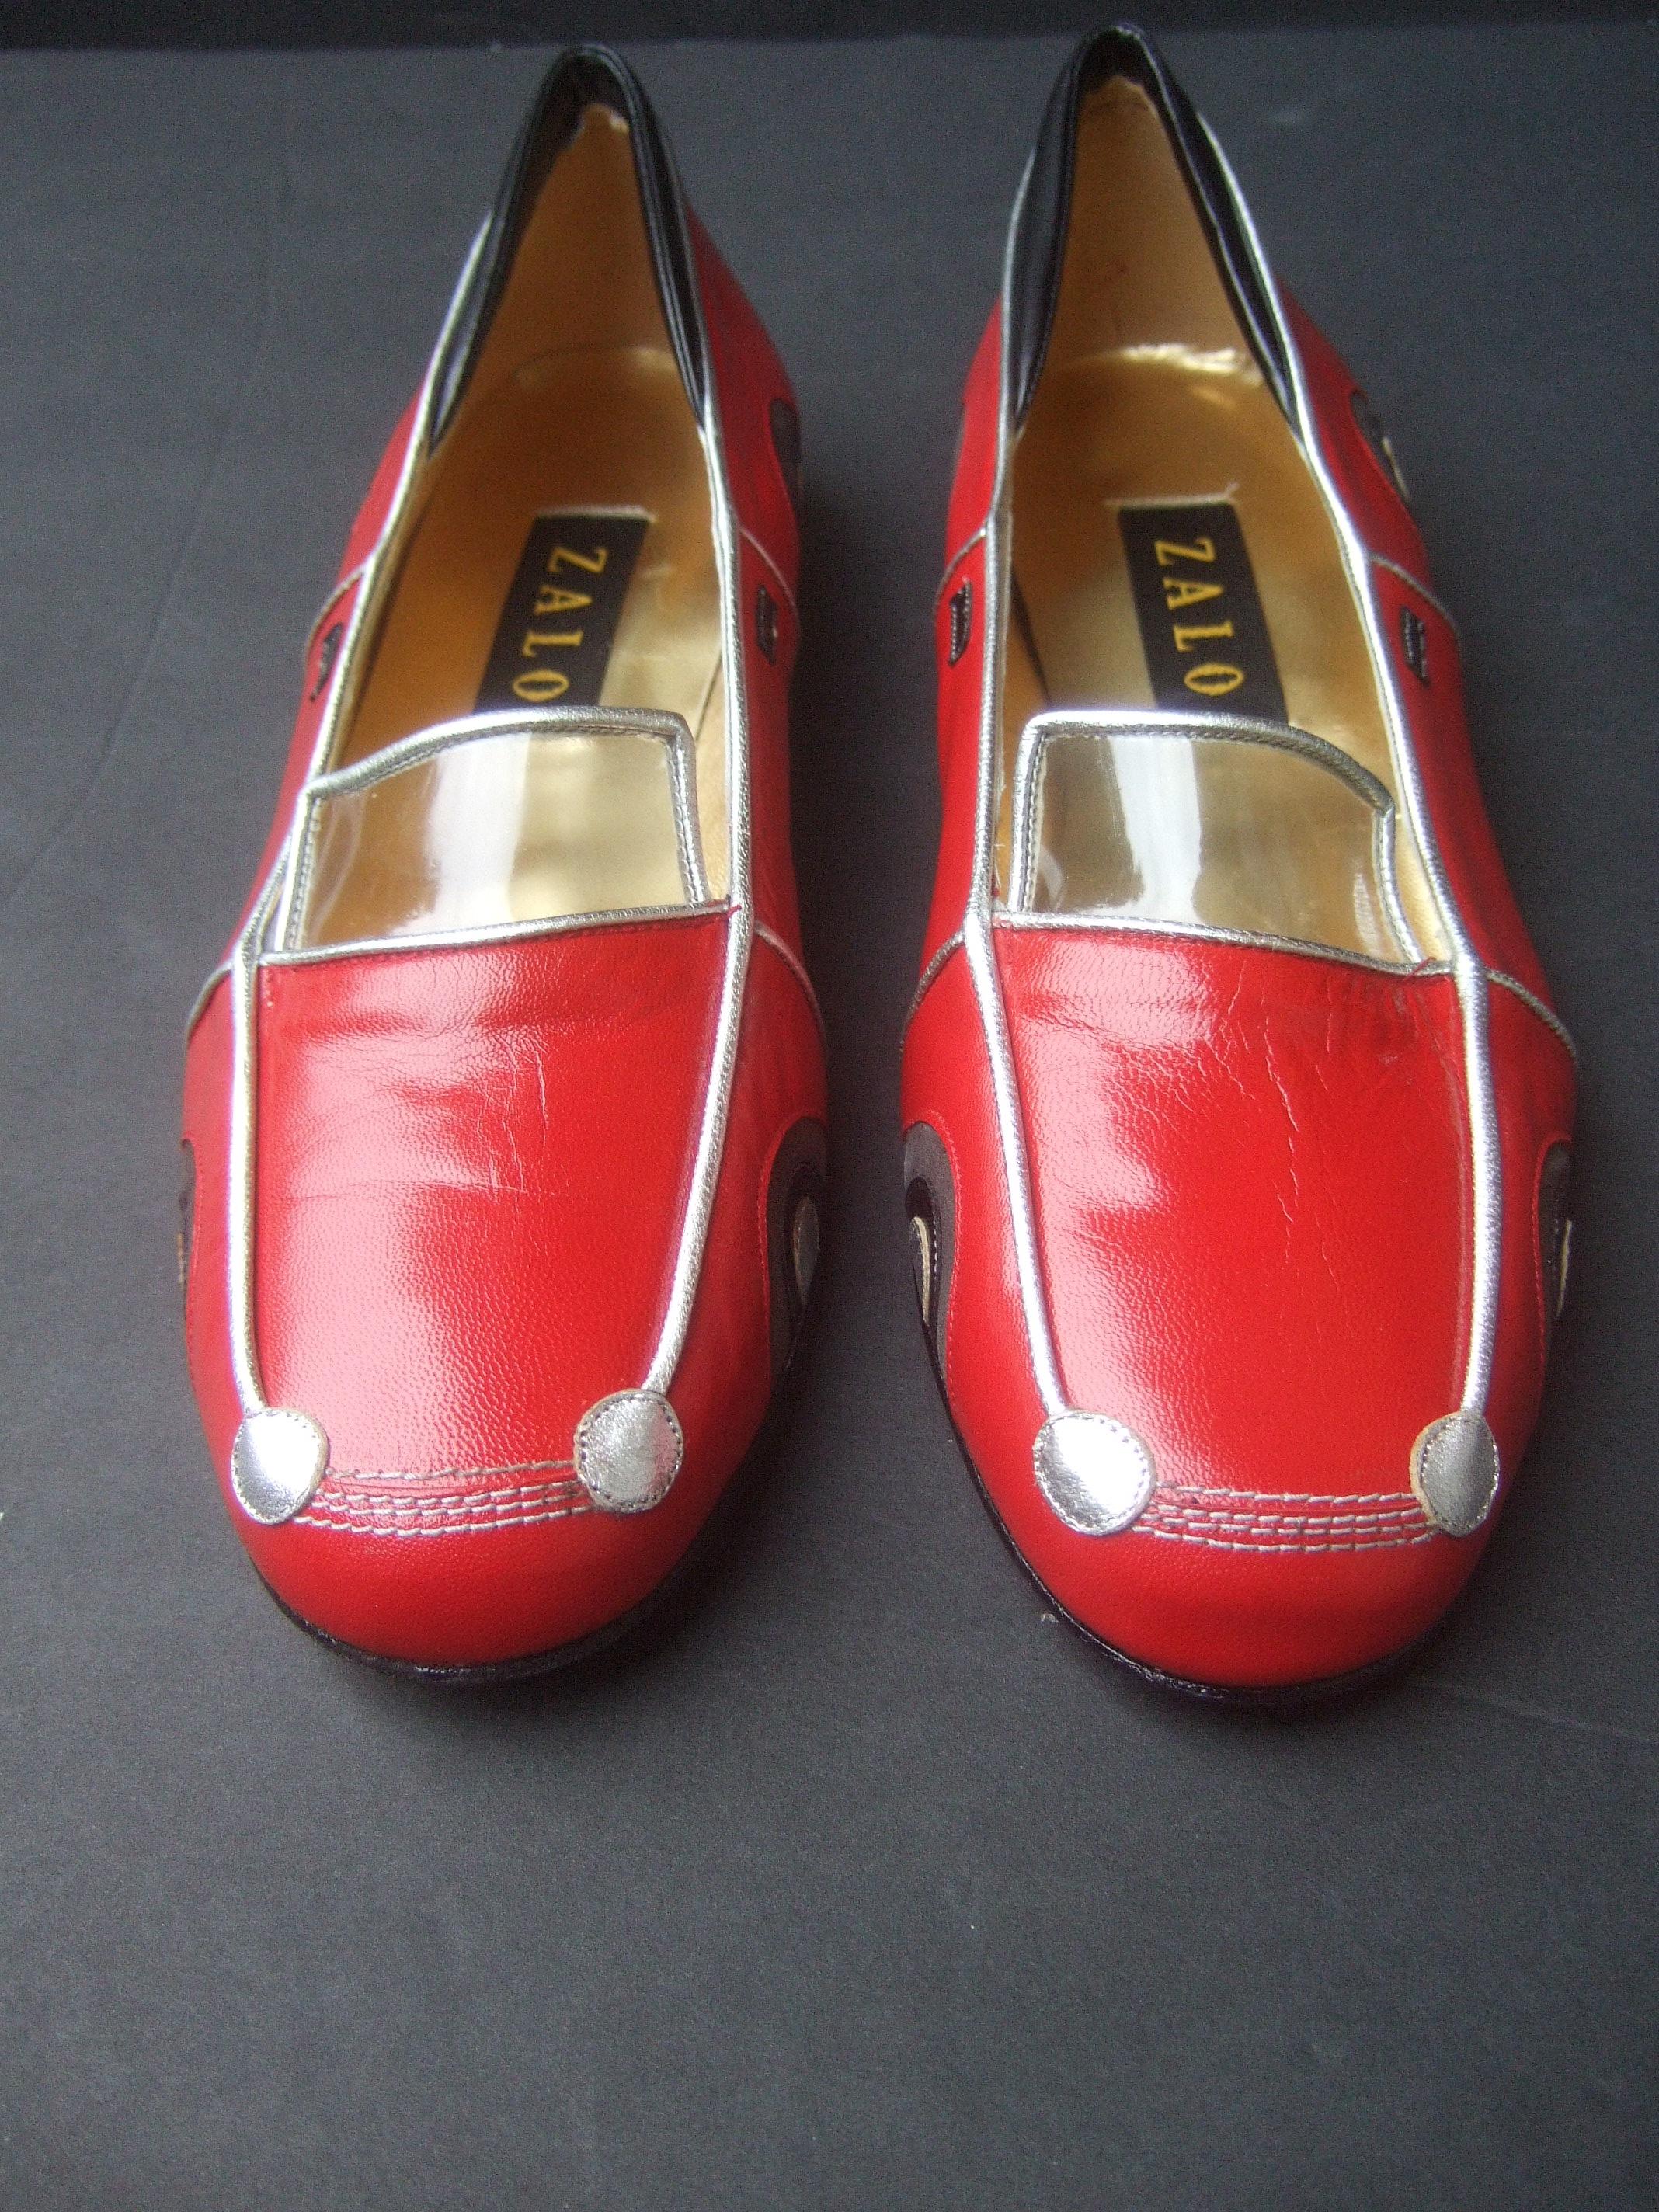 Whimsical Red Leather Sports Car Design Shoes by Zalo US Size 9 M c 1990 9